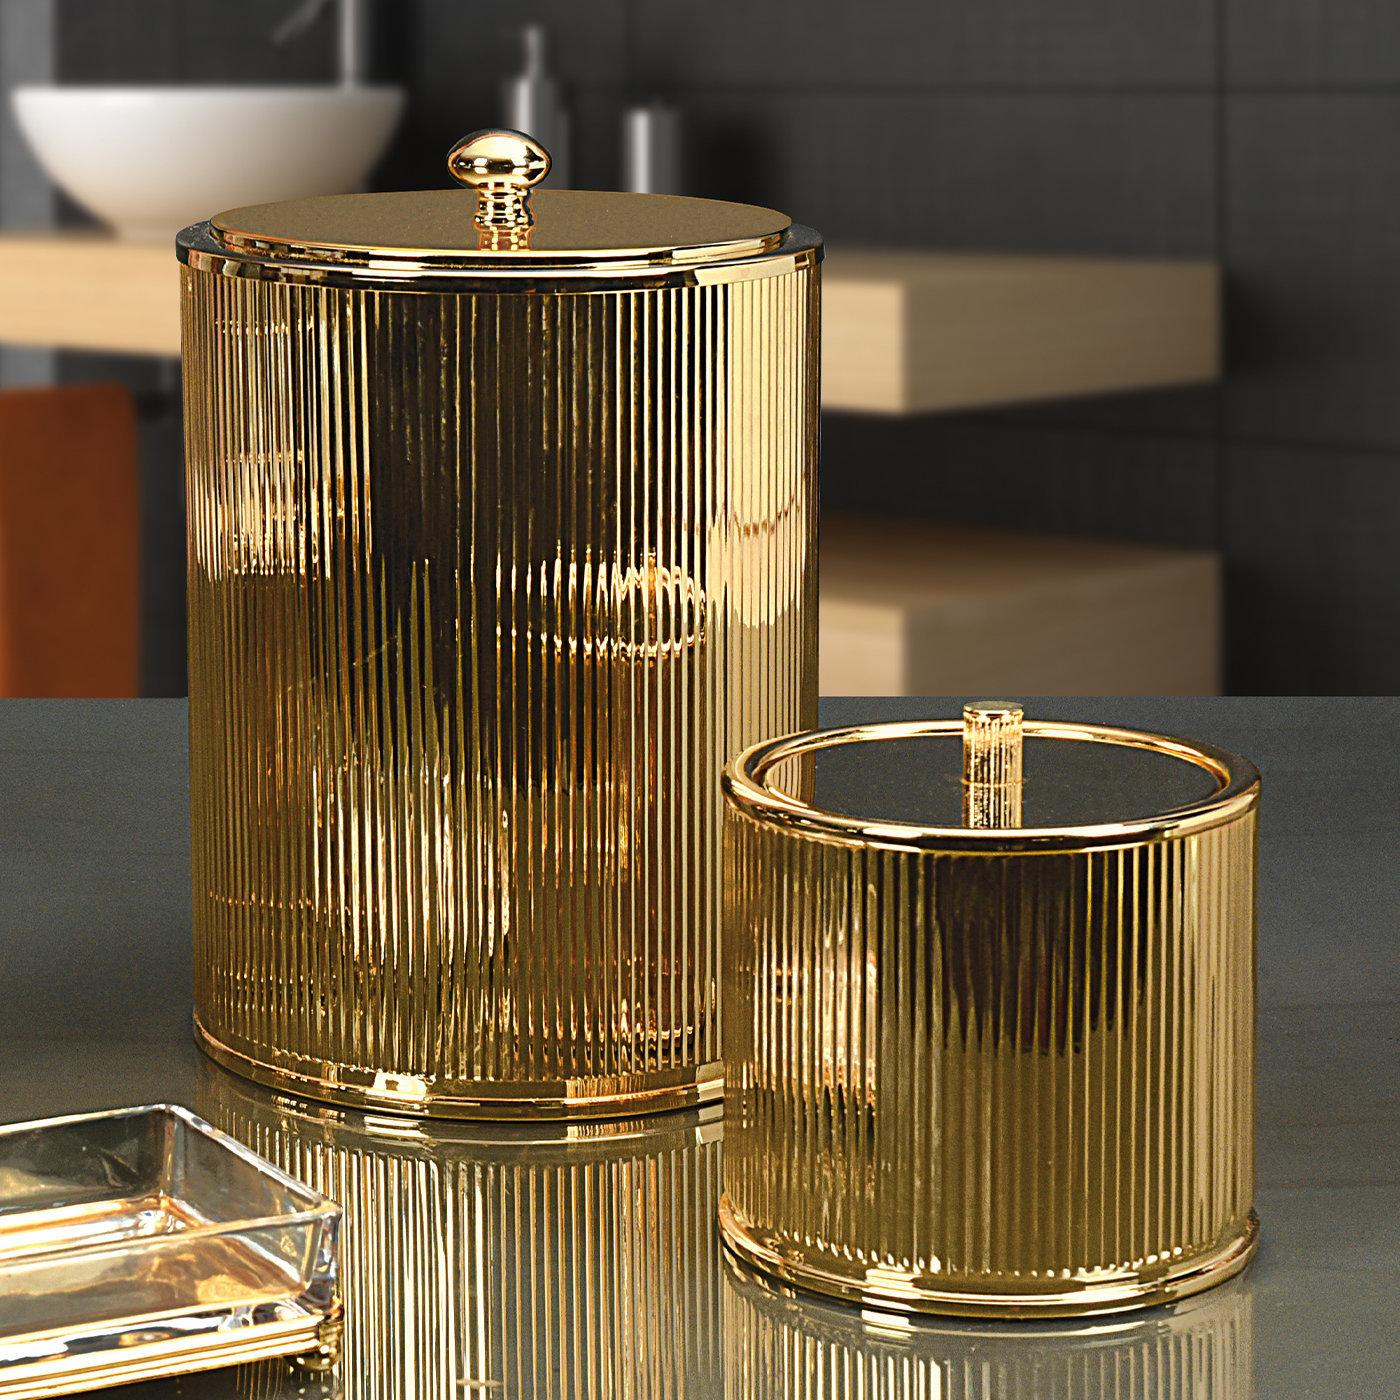 A glorious showcase of craftsmanship, this magnificent bathroom set is comprised of a small basket and box entirely handmade of brass preciously finished with 24k galvanized gold. Brimming with lavish allure, both pieces are decorated with a